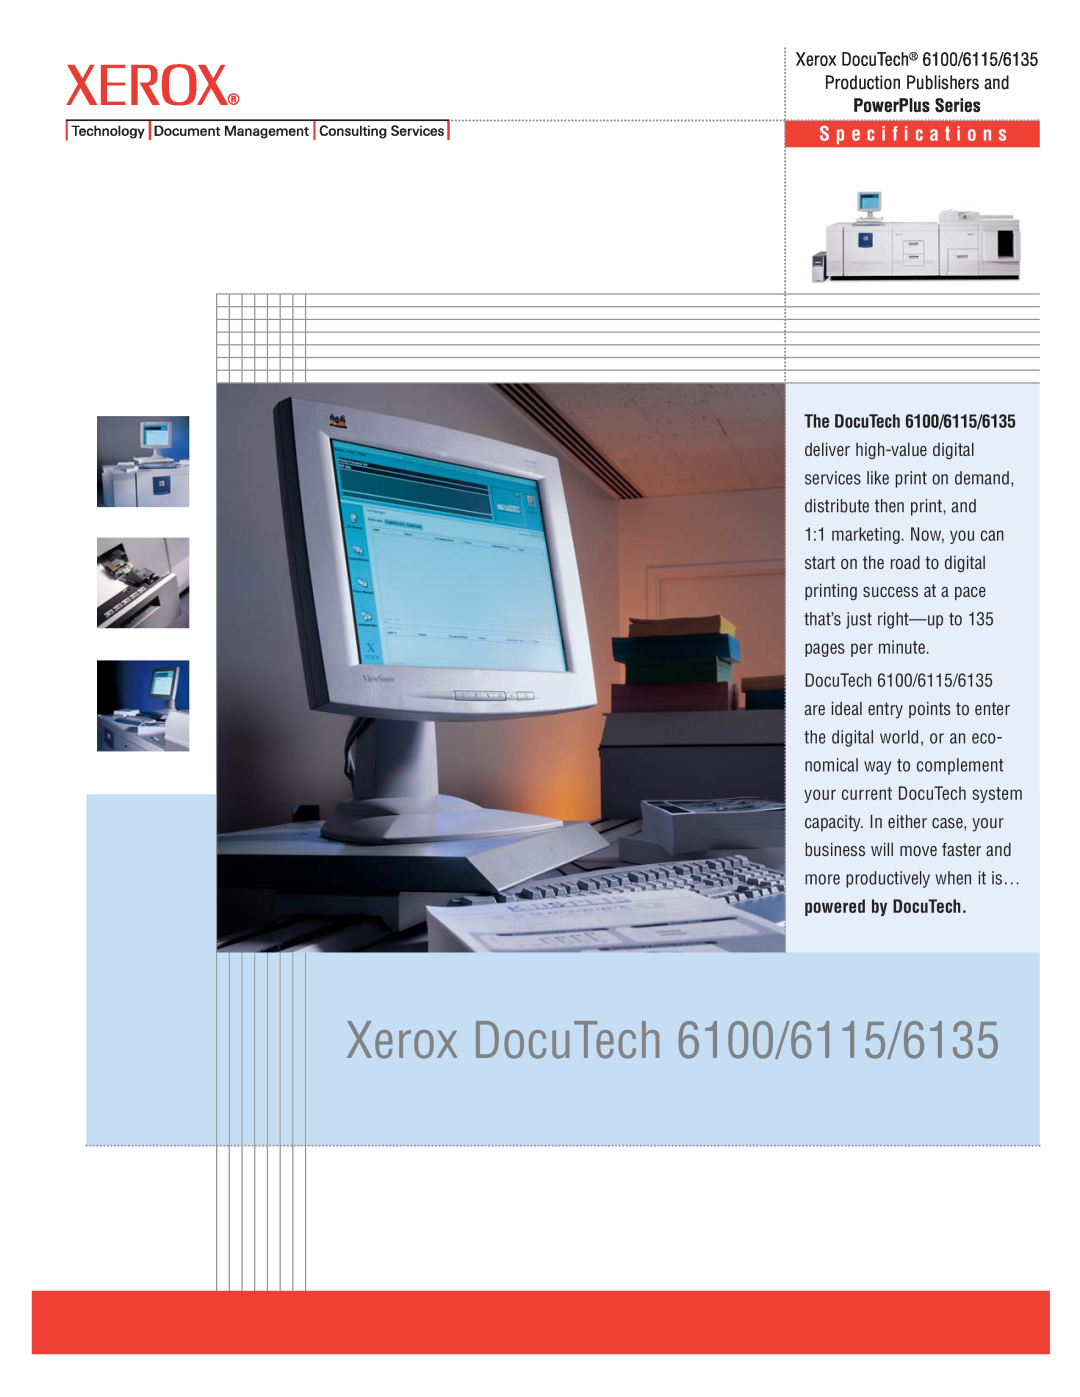 Xerox specifications Xerox DocuTech 6100/6115/6135, S p e c i f i c a t i o n s, Production Publishers and 